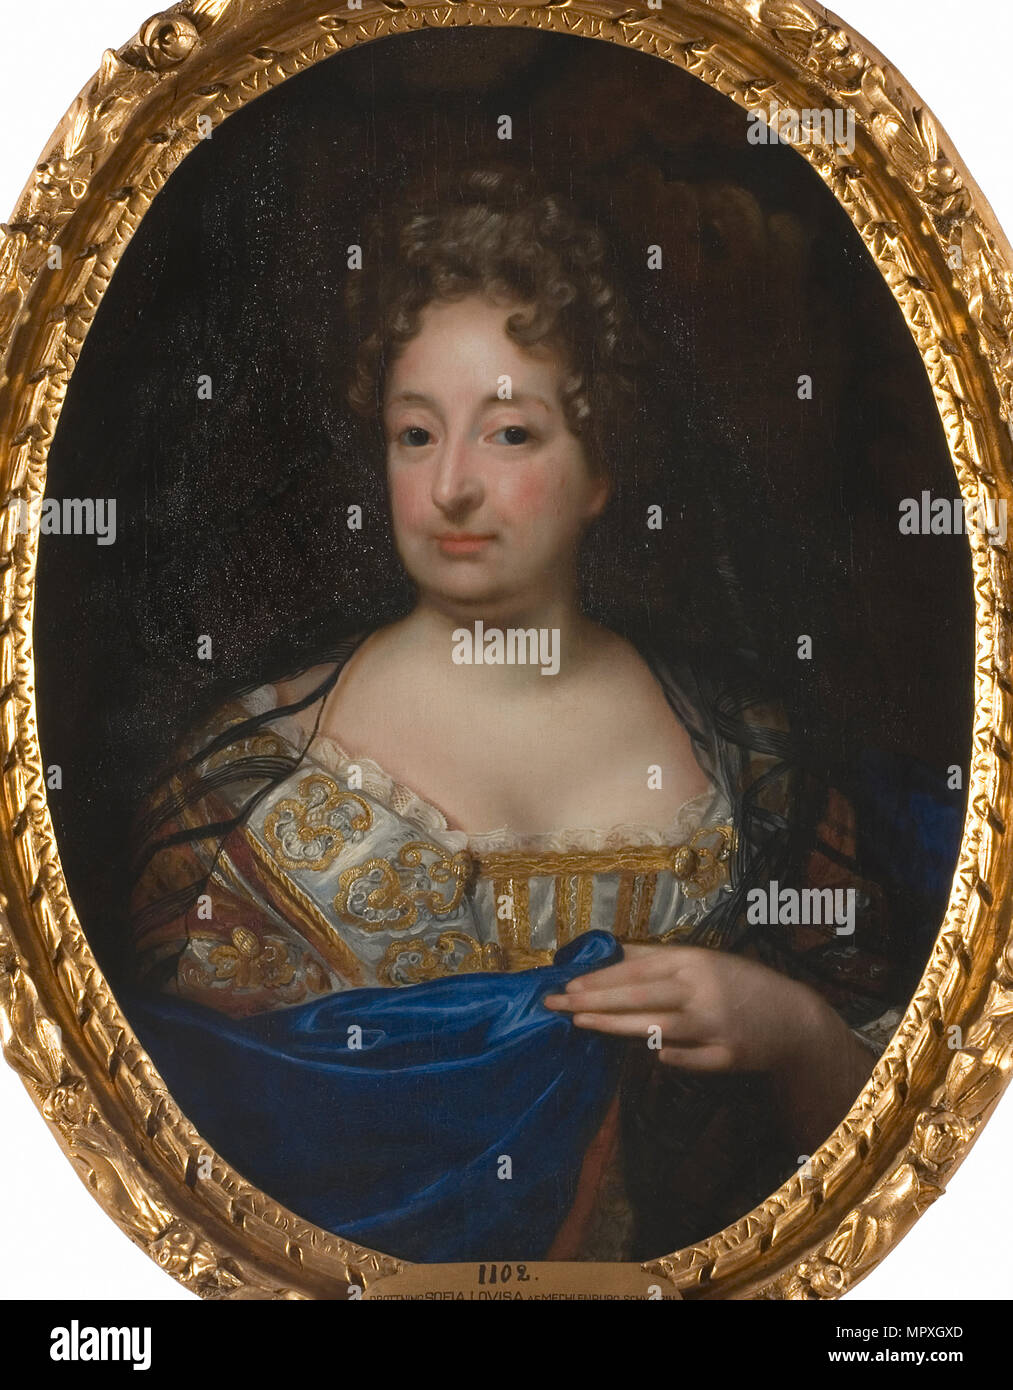 Portrait of Sophia Charlotte of Hanover (1668-1705), Queen in Prussia. Stock Photo